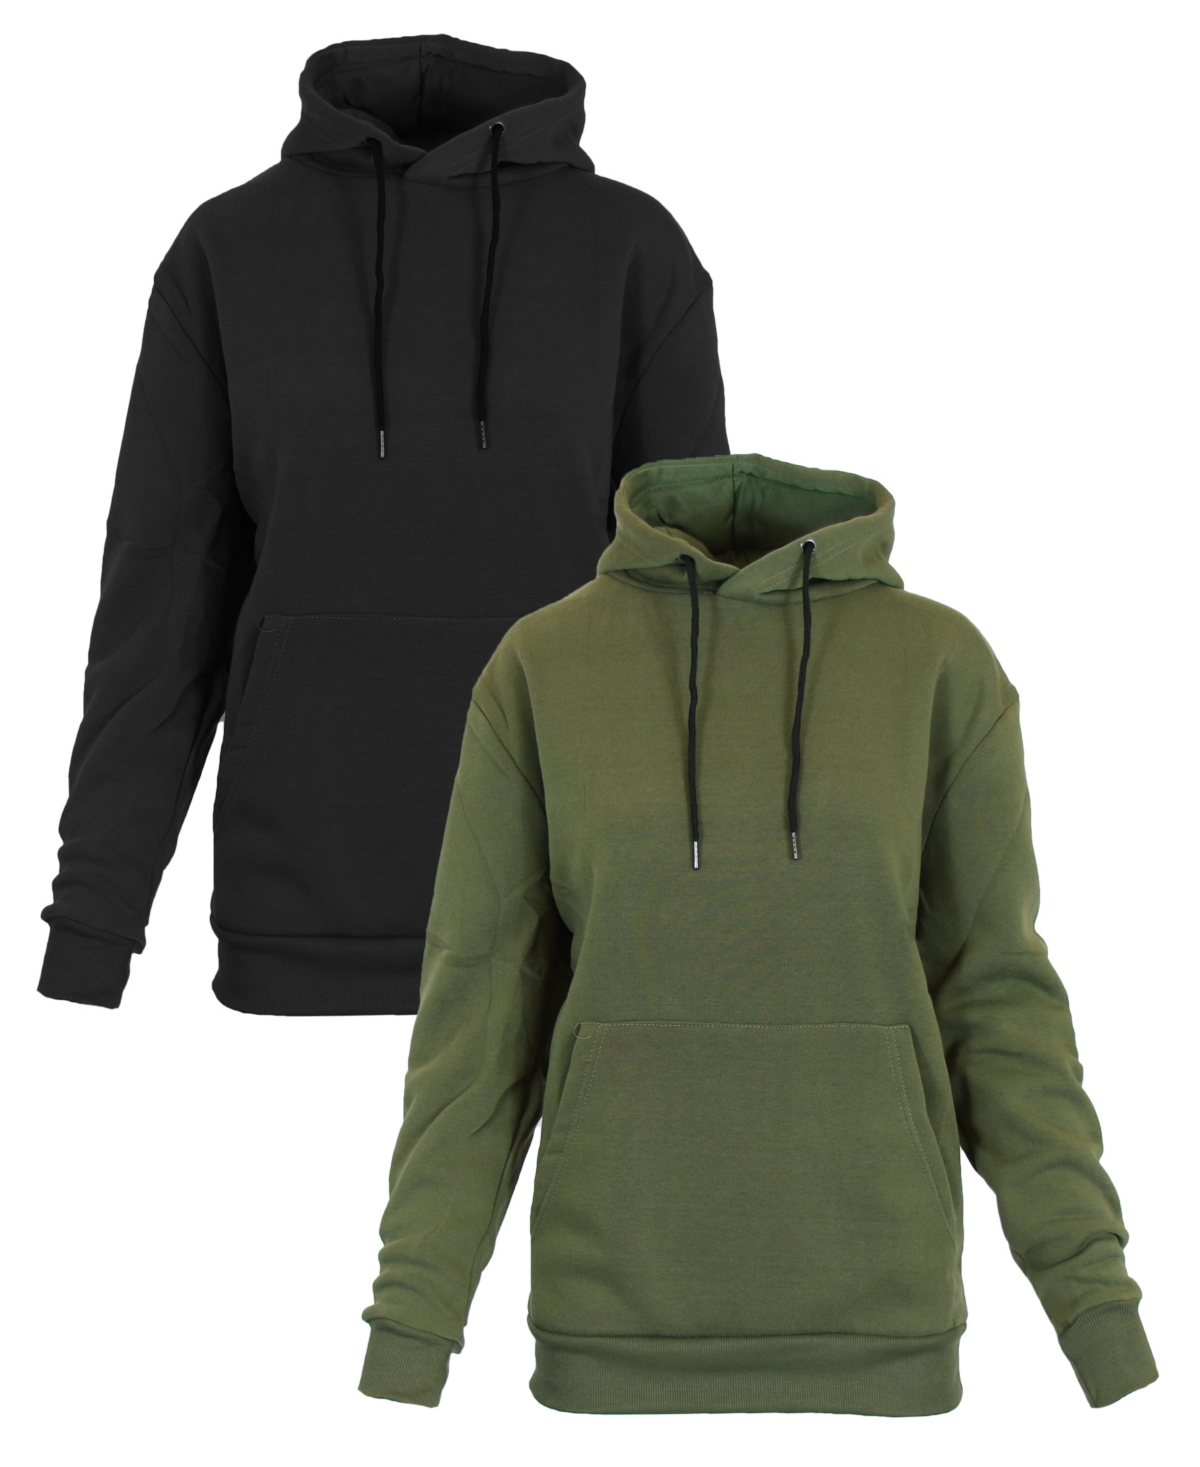 Galaxy By Harvic Women's Heavyweight Loose Fit Fleece Lined Pullover Hoodie Set, 2 Piece In Black-olive